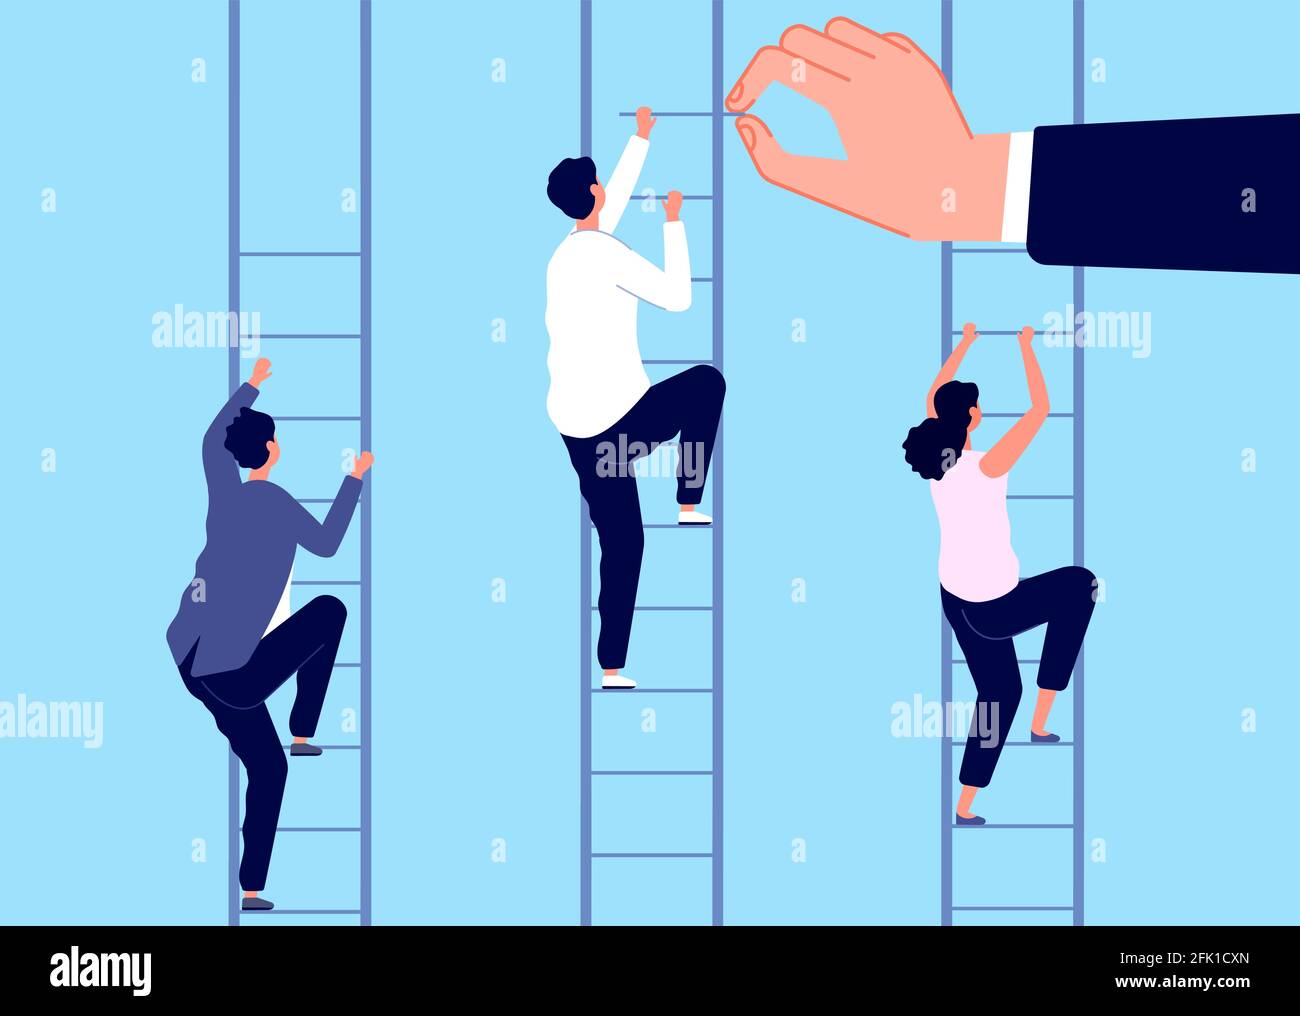 Career ladder. Help business man, corporate challenge. Unequal job conditions and growth opportunity. Leadership competition vector concept Stock Vector